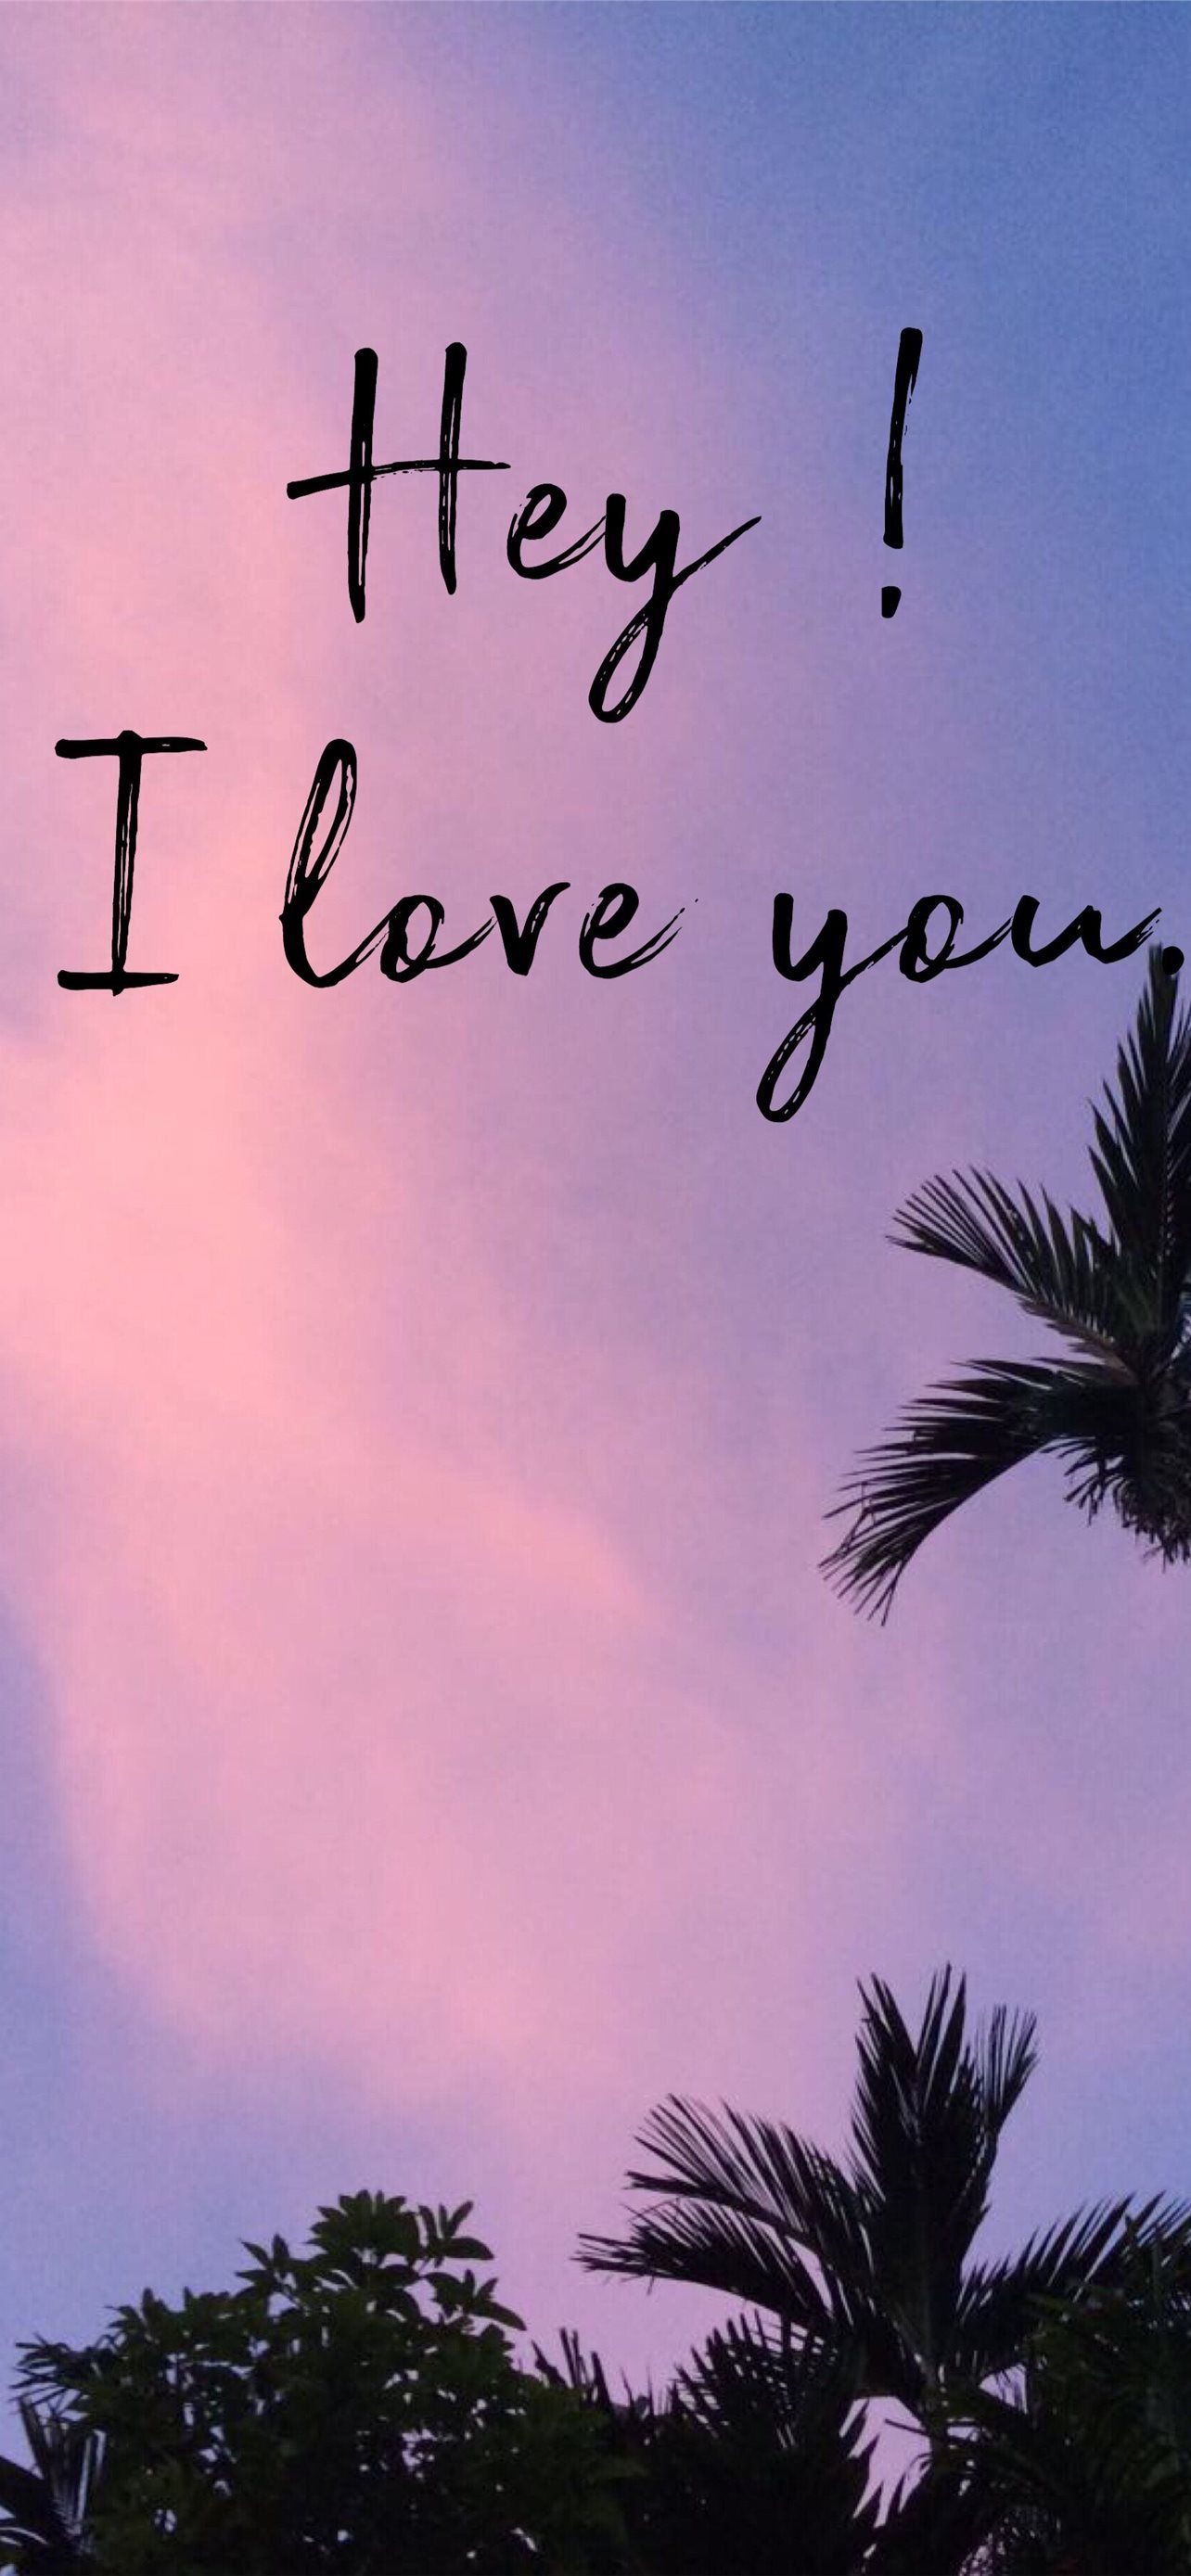 Hey I love you wallpaper for phone and desktop. - Positivity